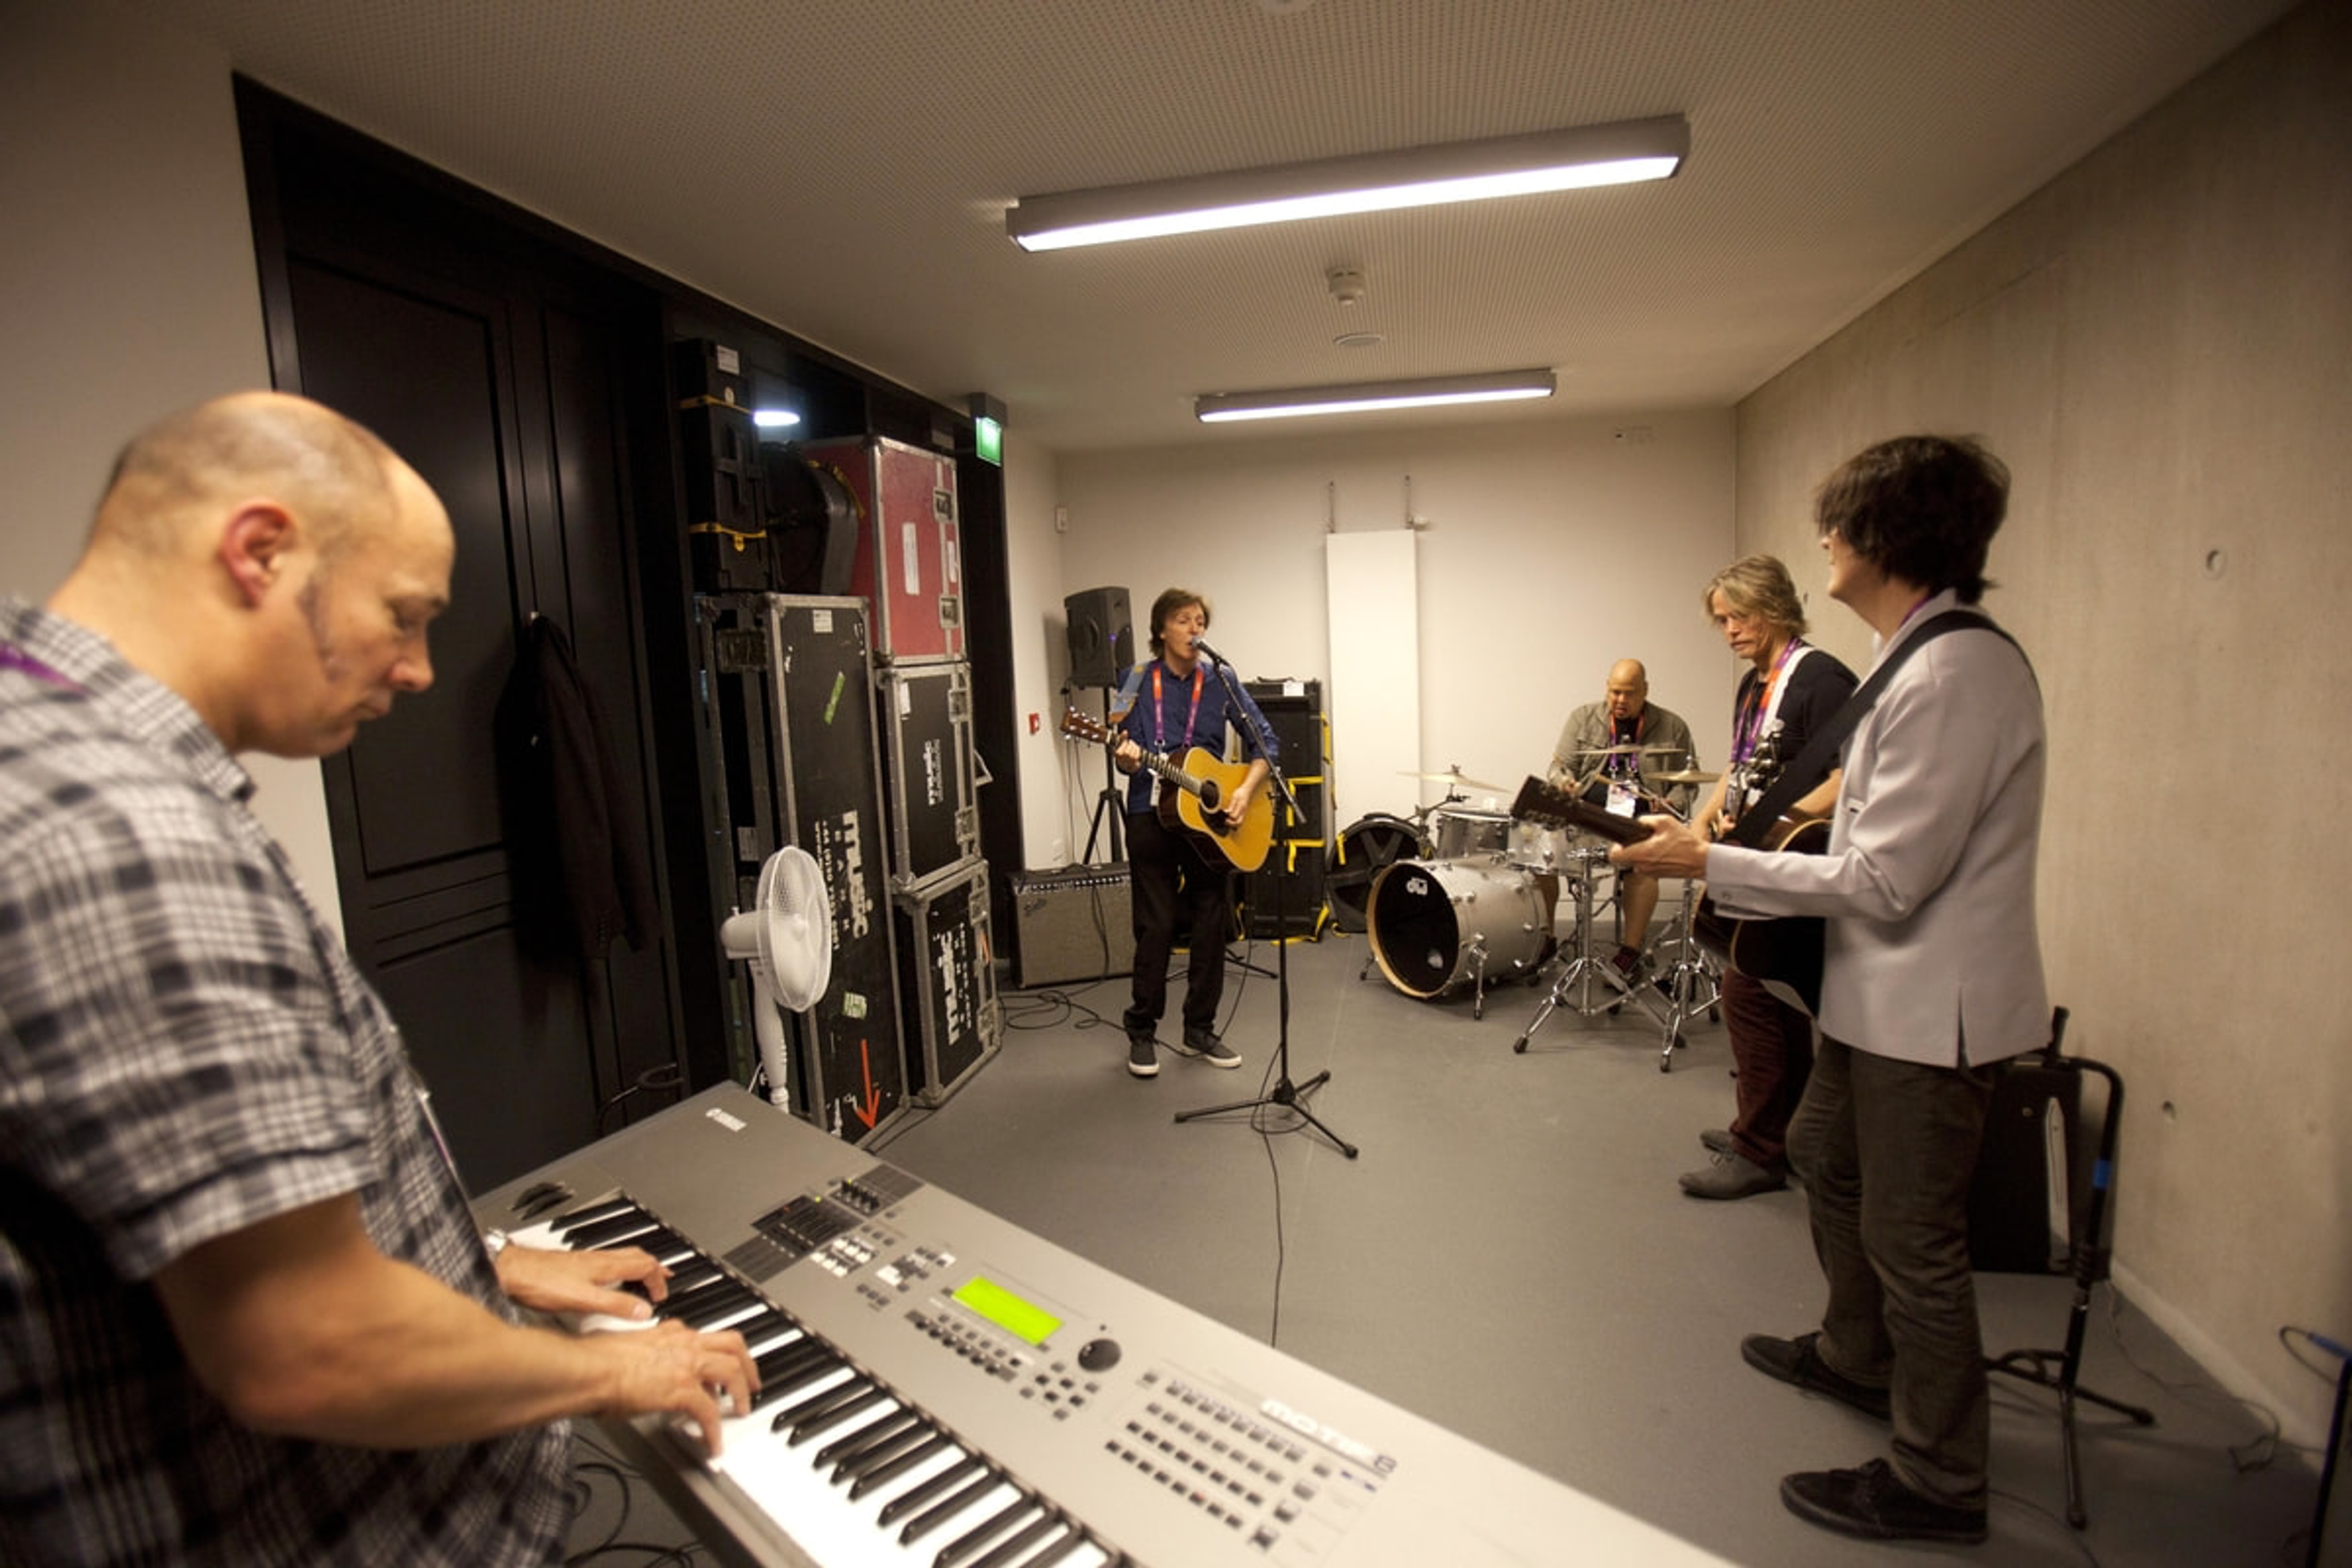 Wix, Paul, Abe, Brian and Rusty rehearsing before the Olympics Opening Ceremony, London, 27-Jul-12